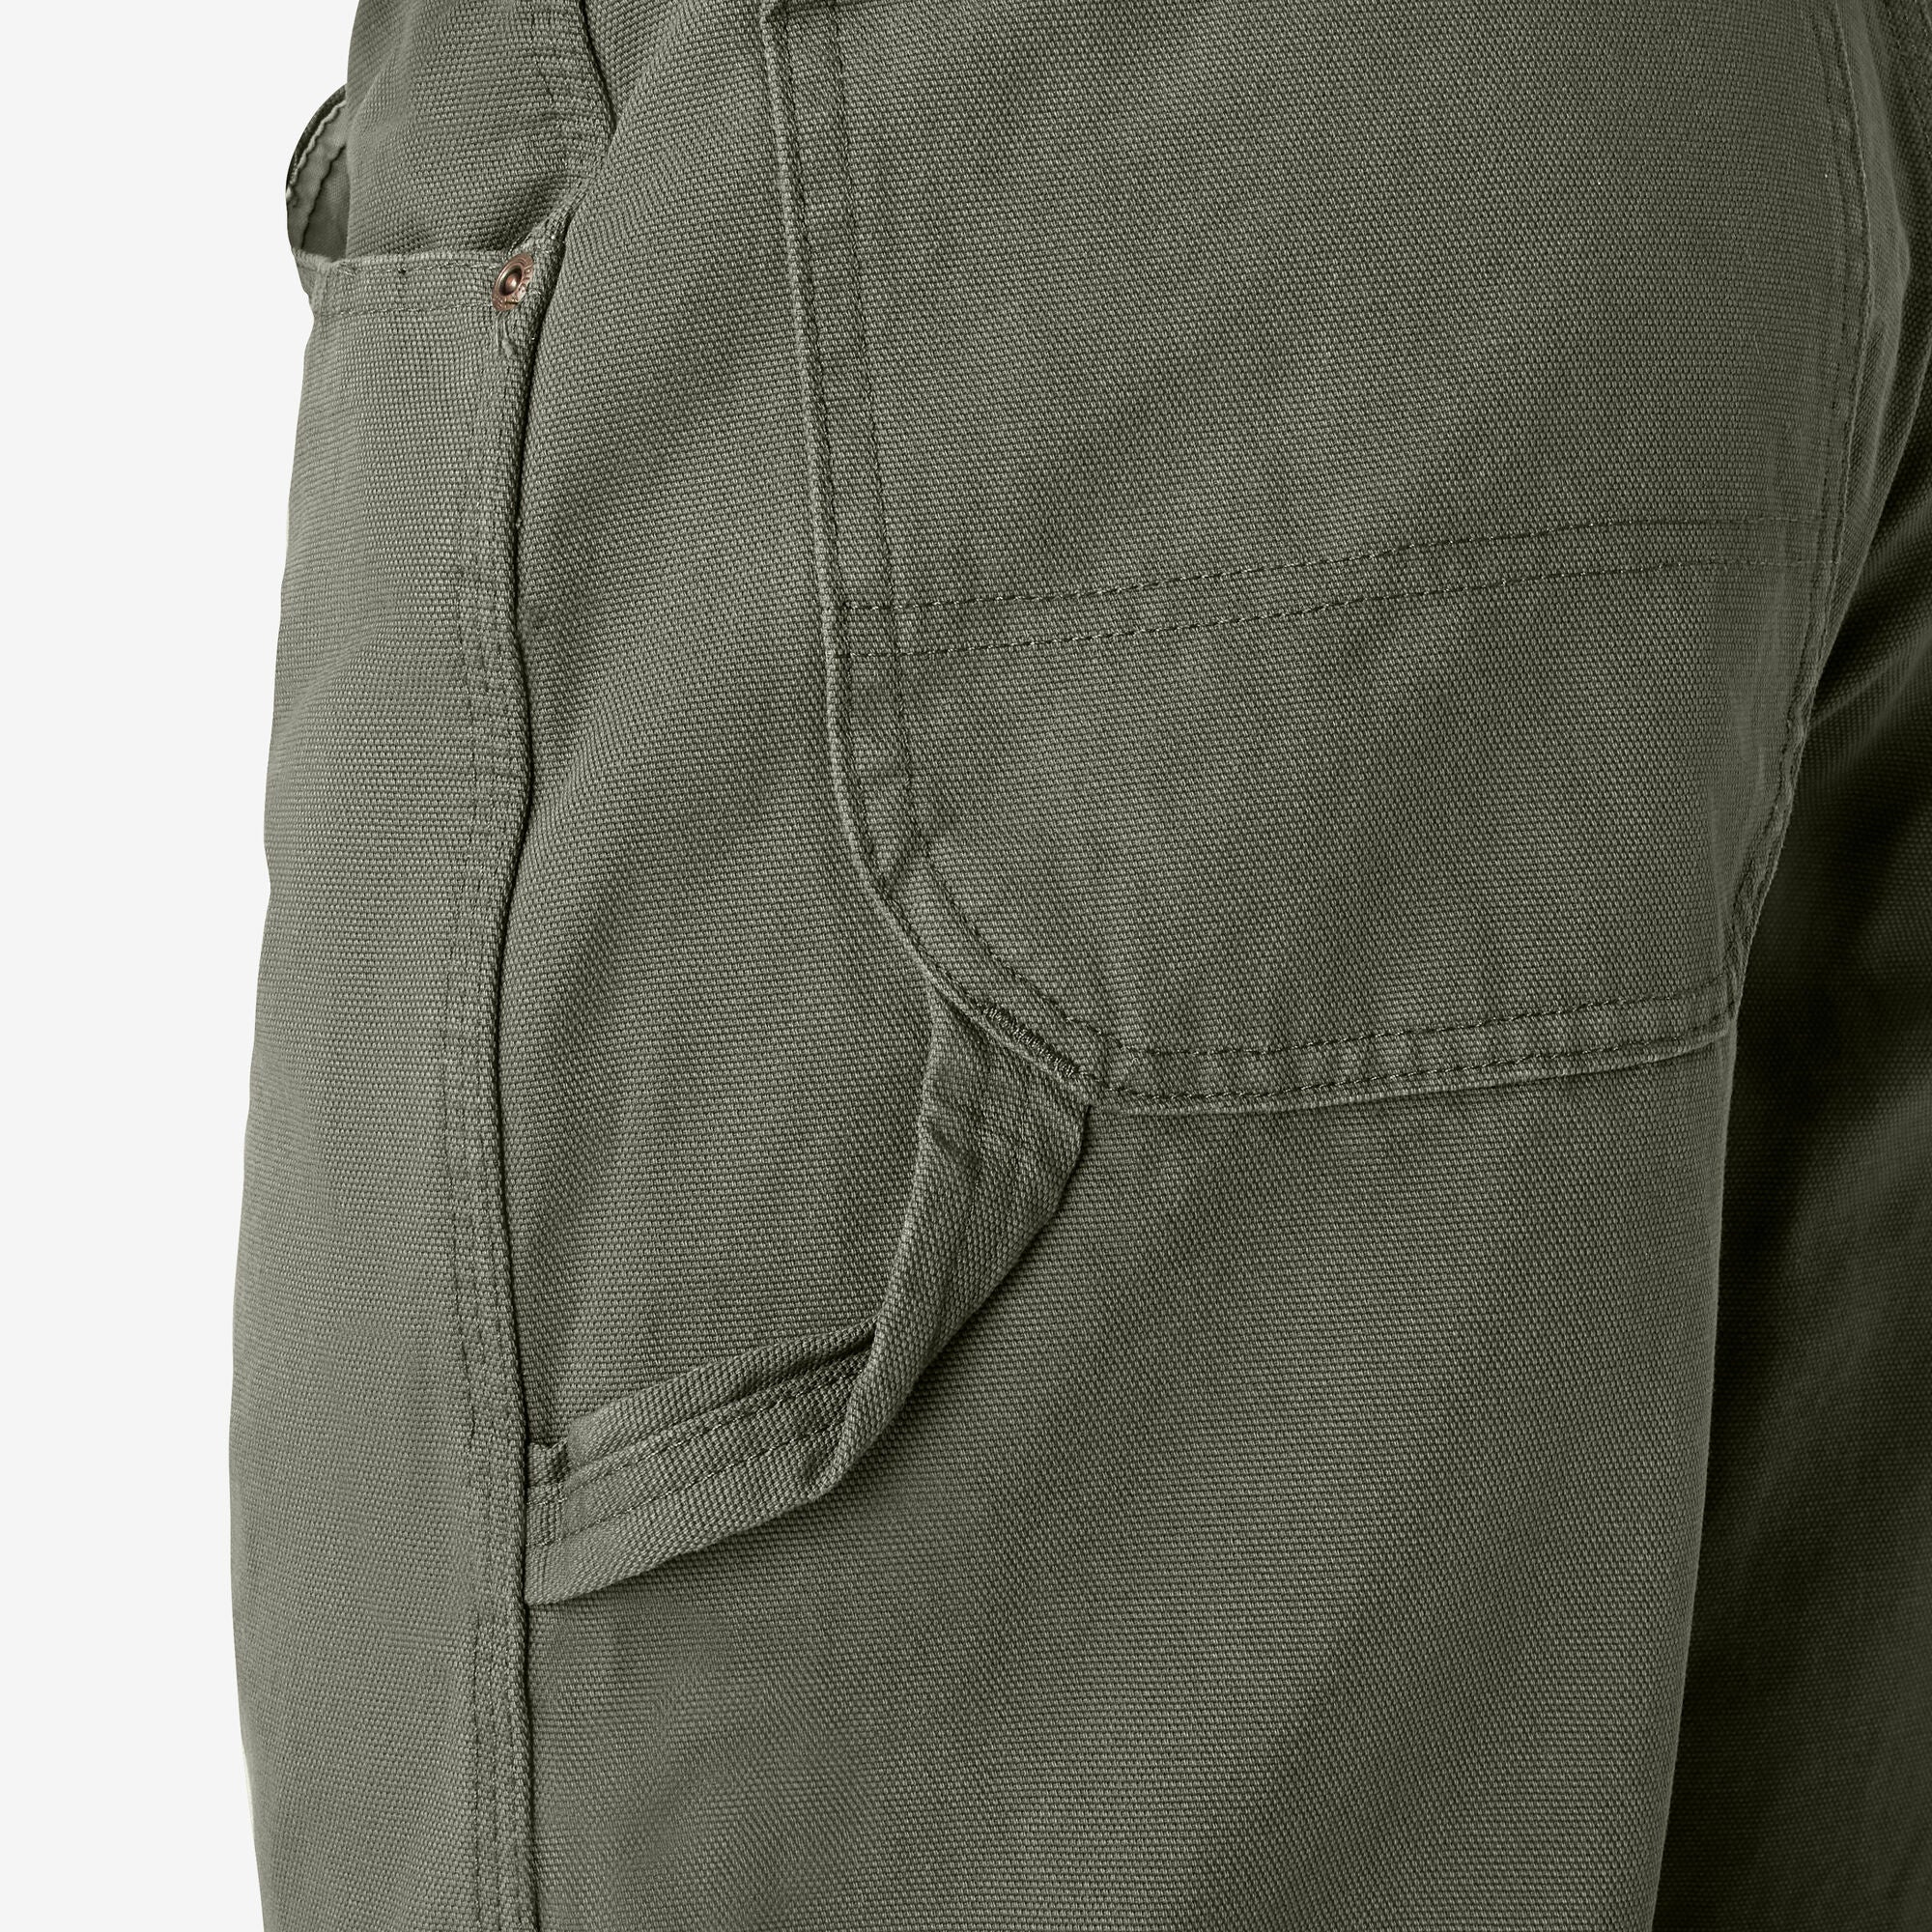 Dickies 1939 Relaxed Fit Carpenter Pants - Rinsed Moss Green